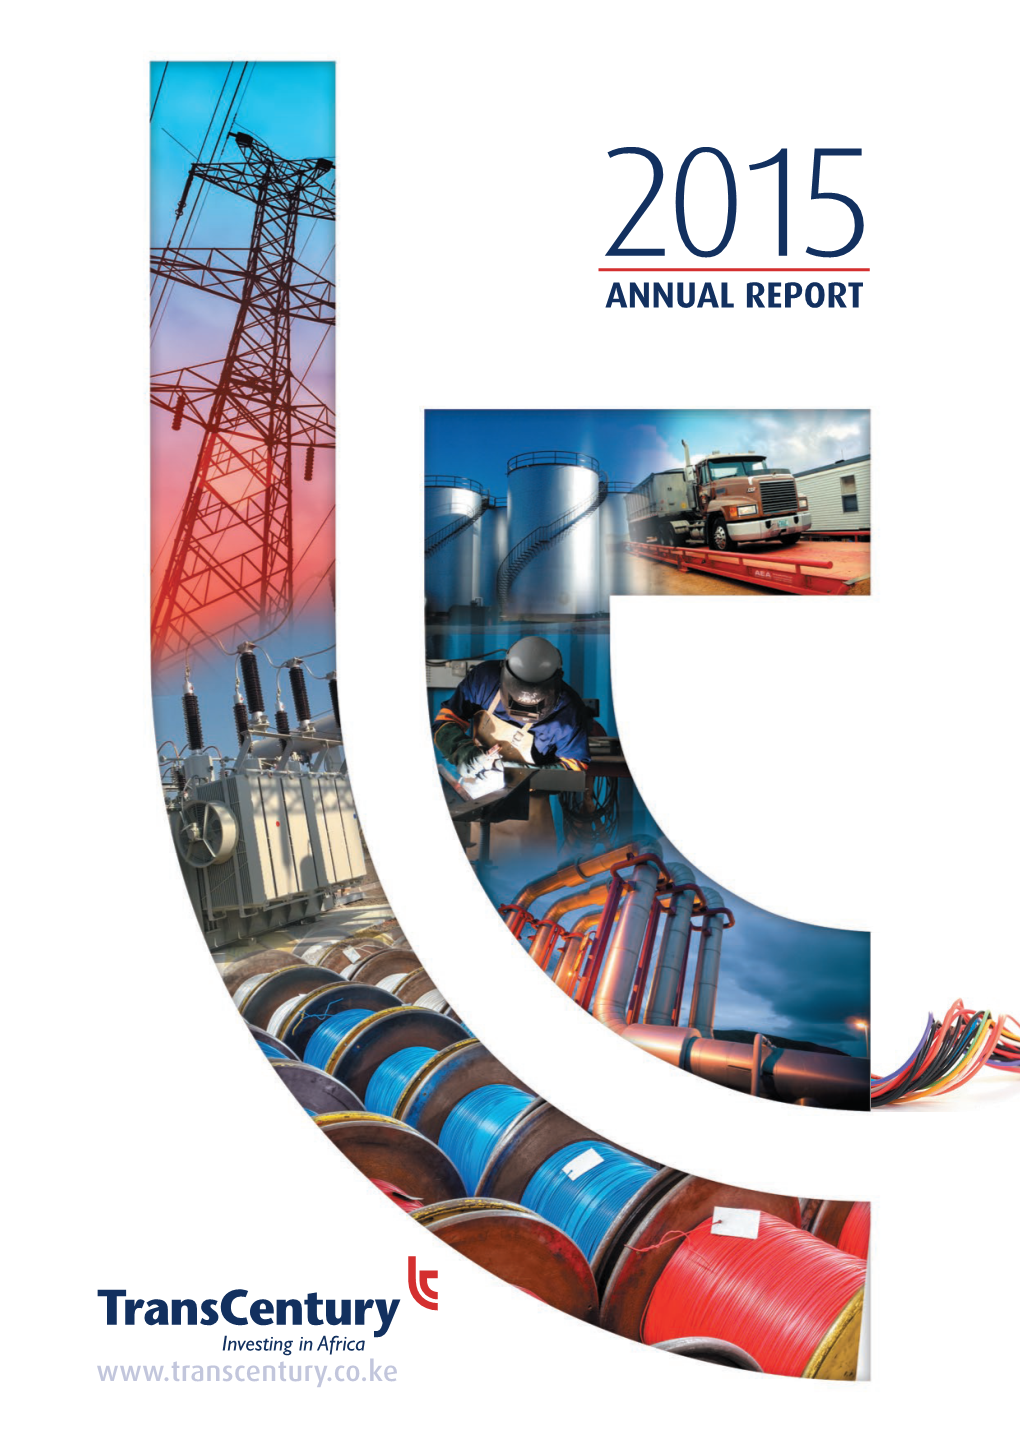 FY2015 Annual Report